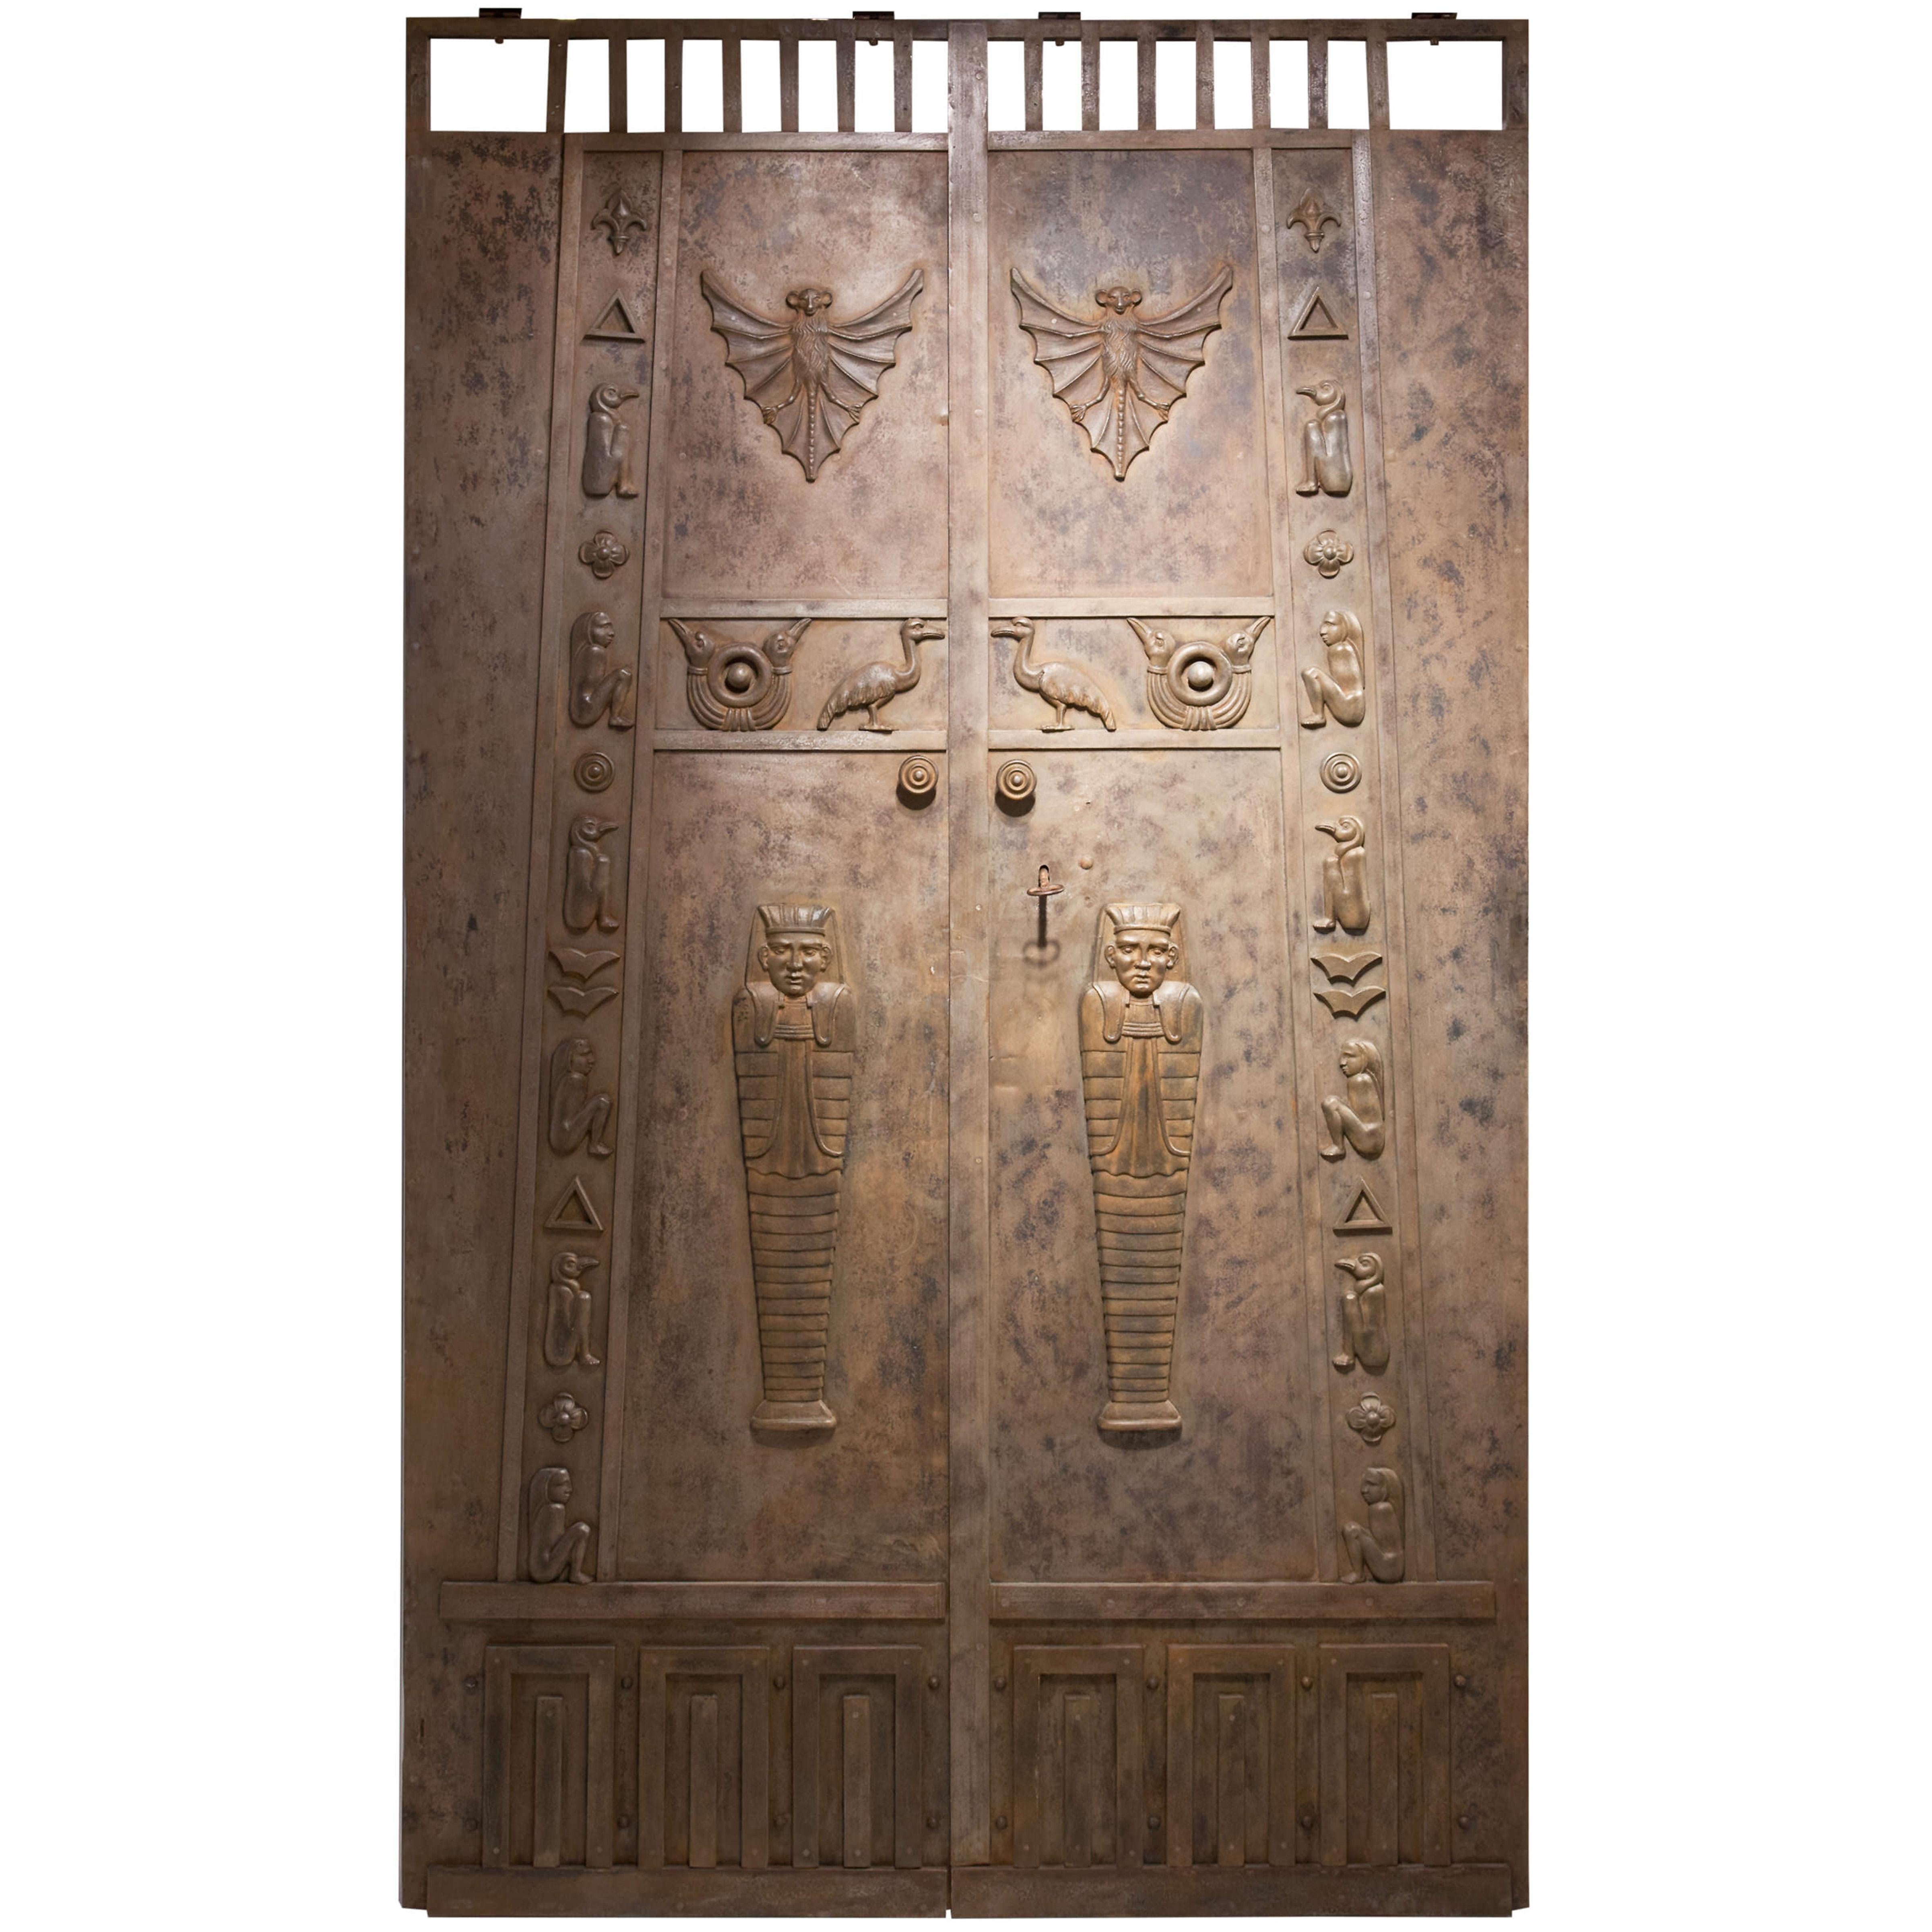 The doors are designed according to an Egyptian pylon. Stylized palace facades at the bottom, slits at the top for ventilation. On the sides geniuses as guardians in the form of falcons and squatting human figures. On the door front bats and sun